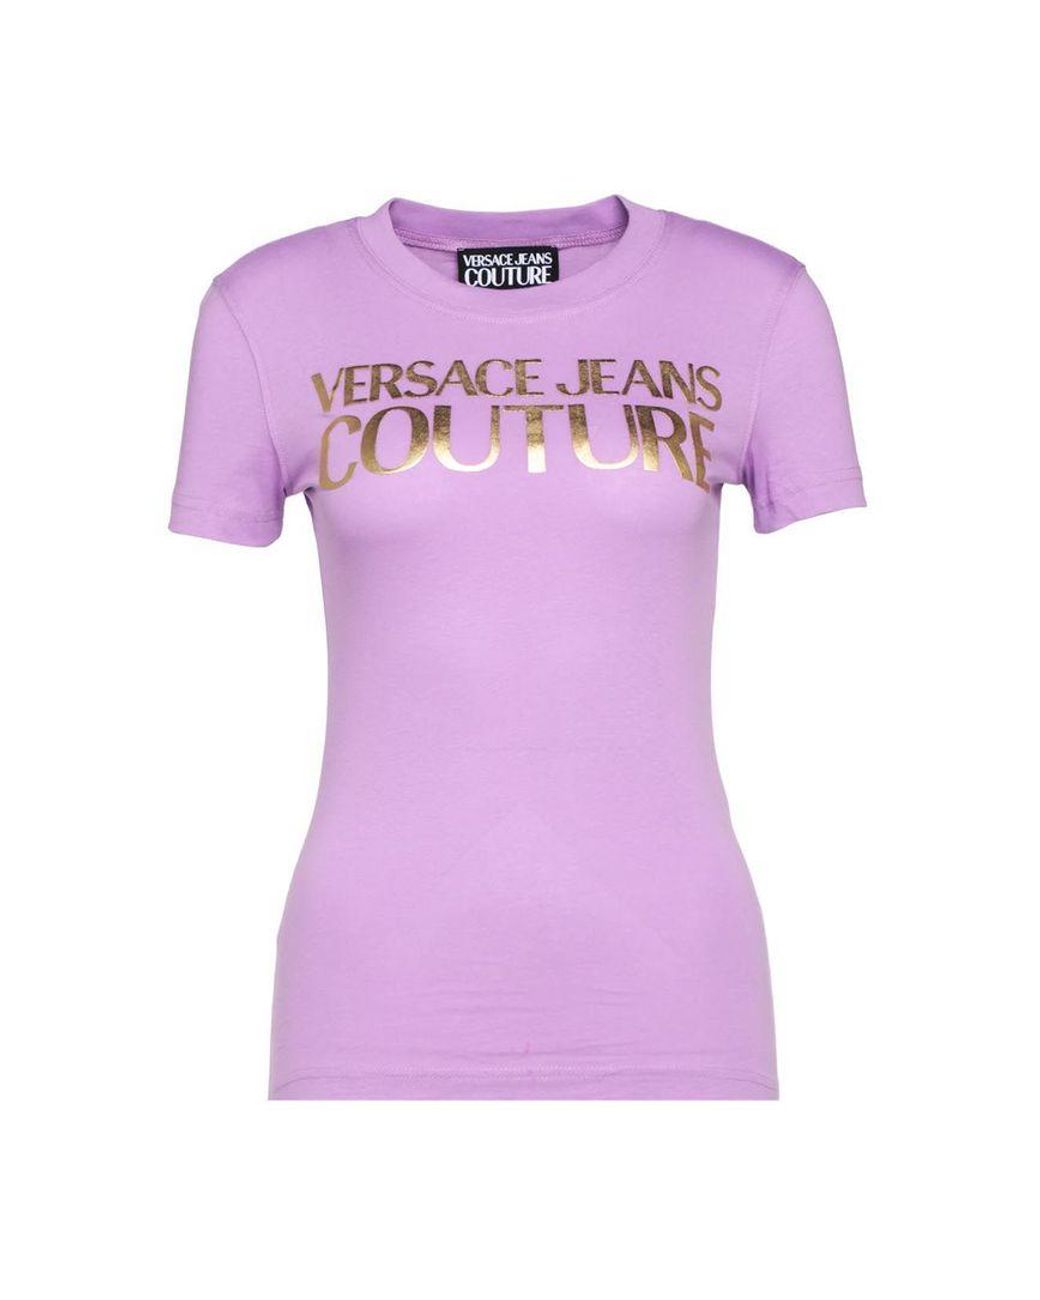 Versace Women's Hwa7tb3031911317 Purple Other Materials T-shirt - Lyst